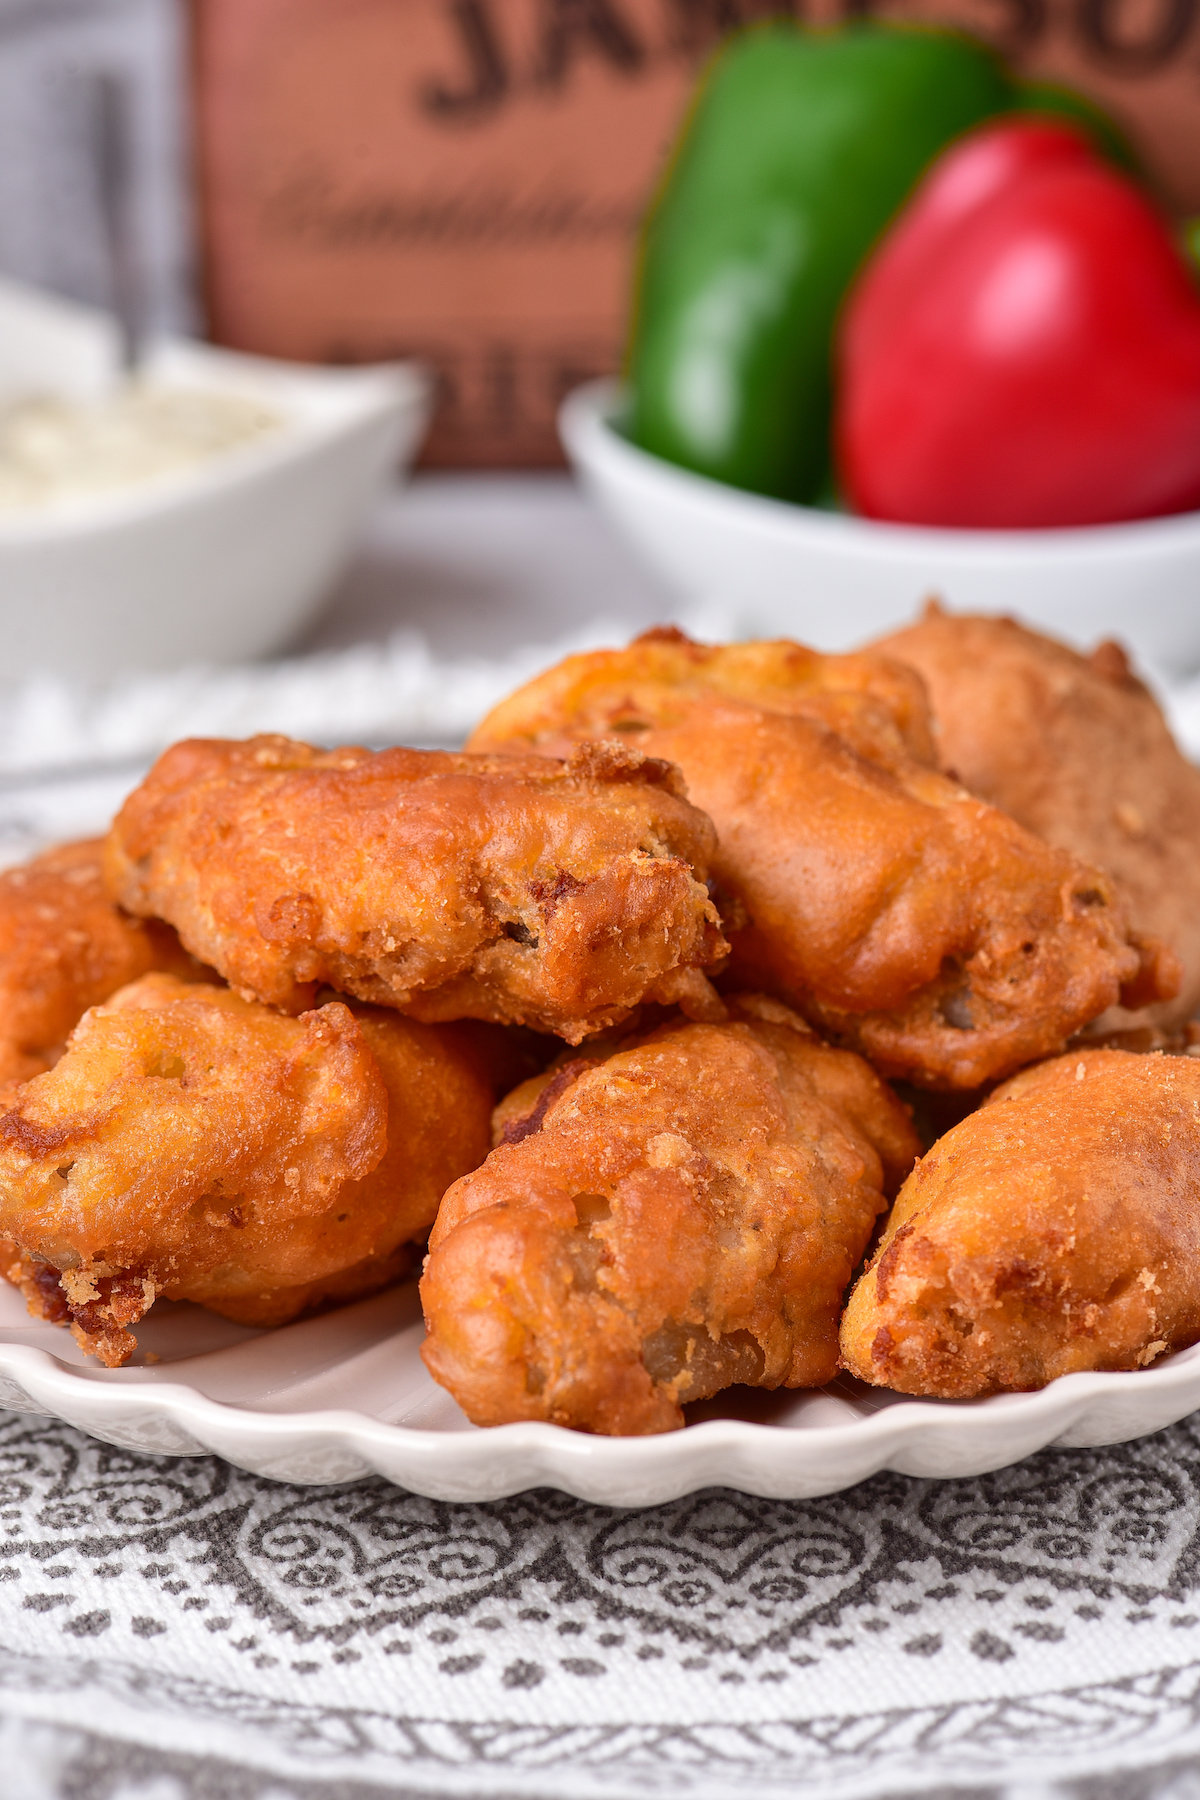 side view of a plate filled with deep fried chicken wings set in front of a dish of dipping sauce